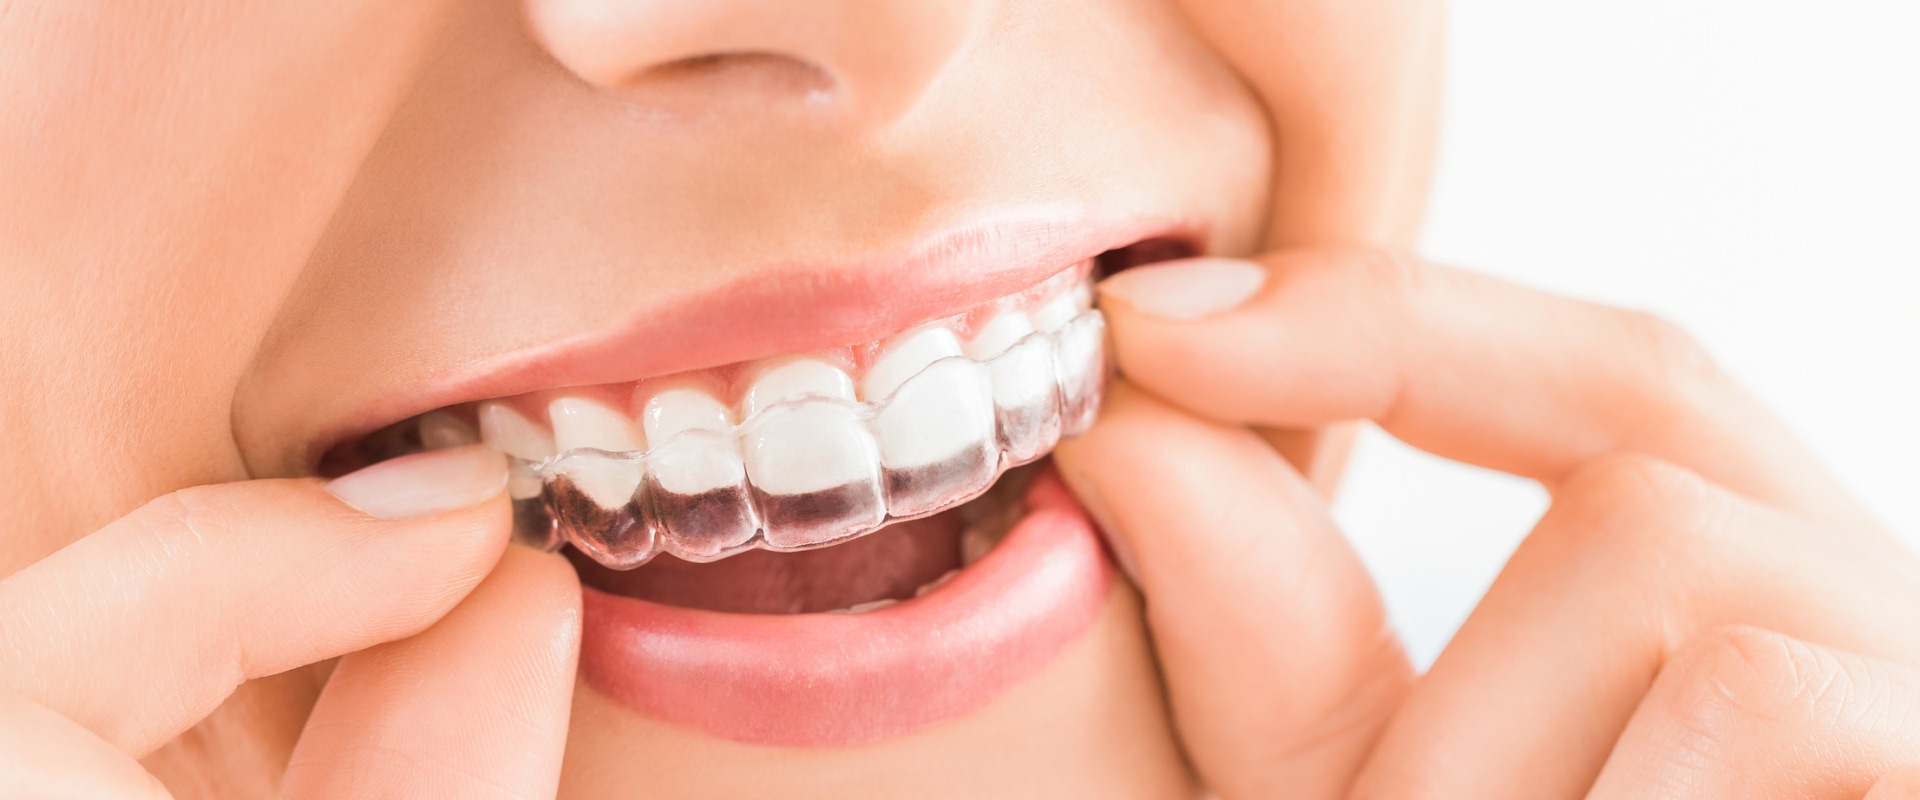 Does invisalign work as well as braces?